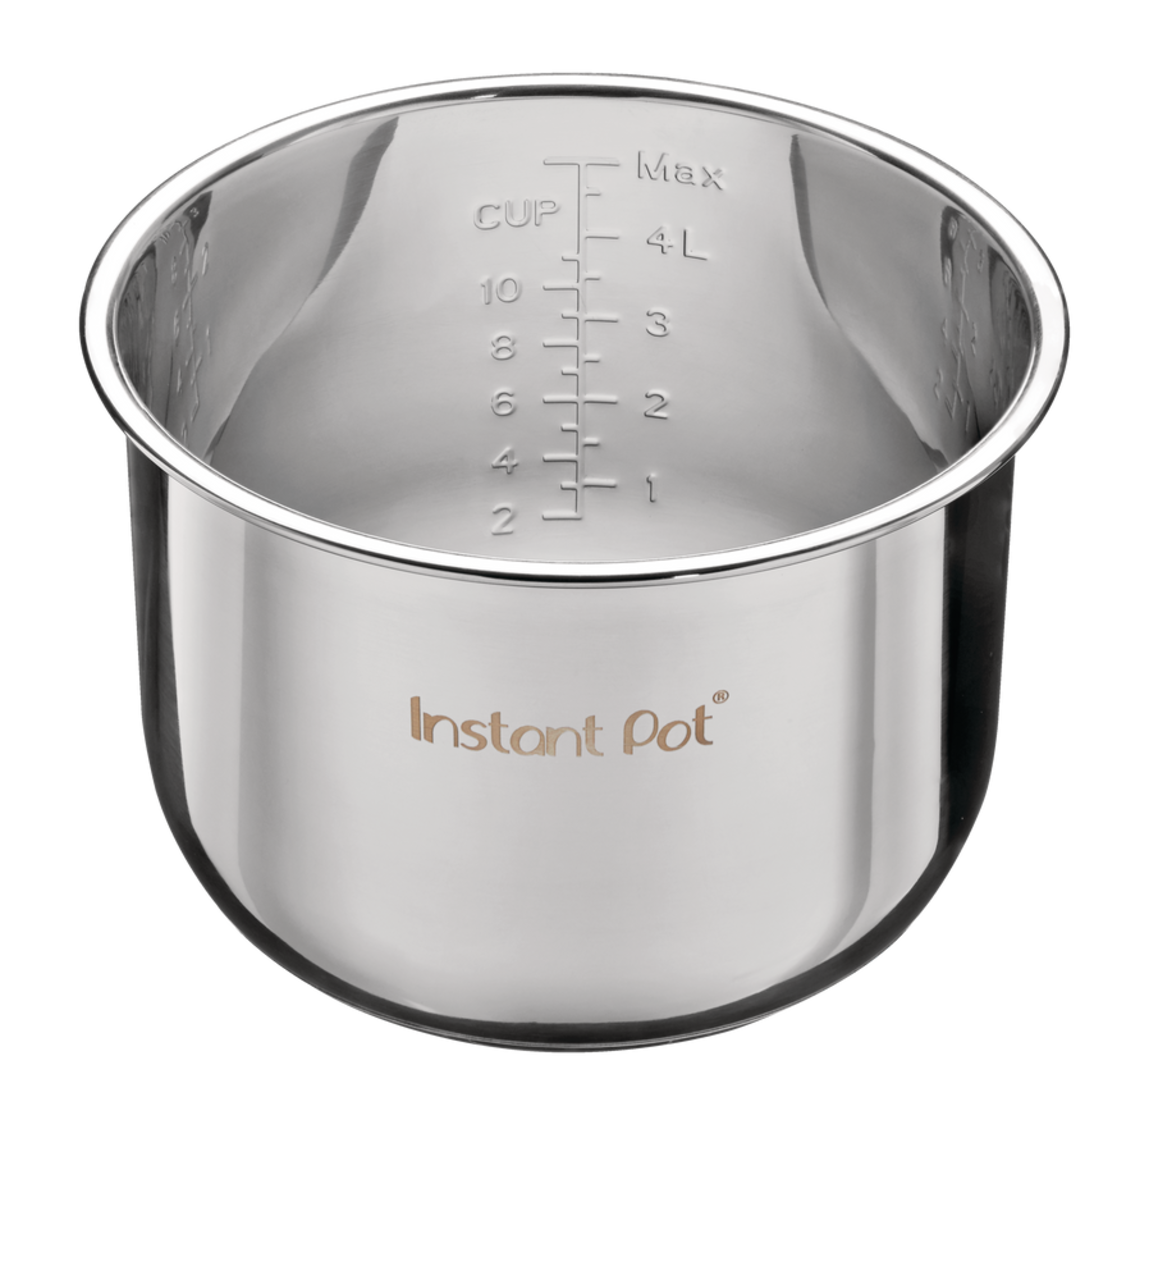 https://media-www.canadiantire.ca/product/living/kitchen/kitchen-appliances/0435749/instant-pot-stainless-steel-pot-6qt-7efcf440-bdc2-47a5-97fc-4638189b6953.png?imdensity=1&imwidth=1244&impolicy=mZoom